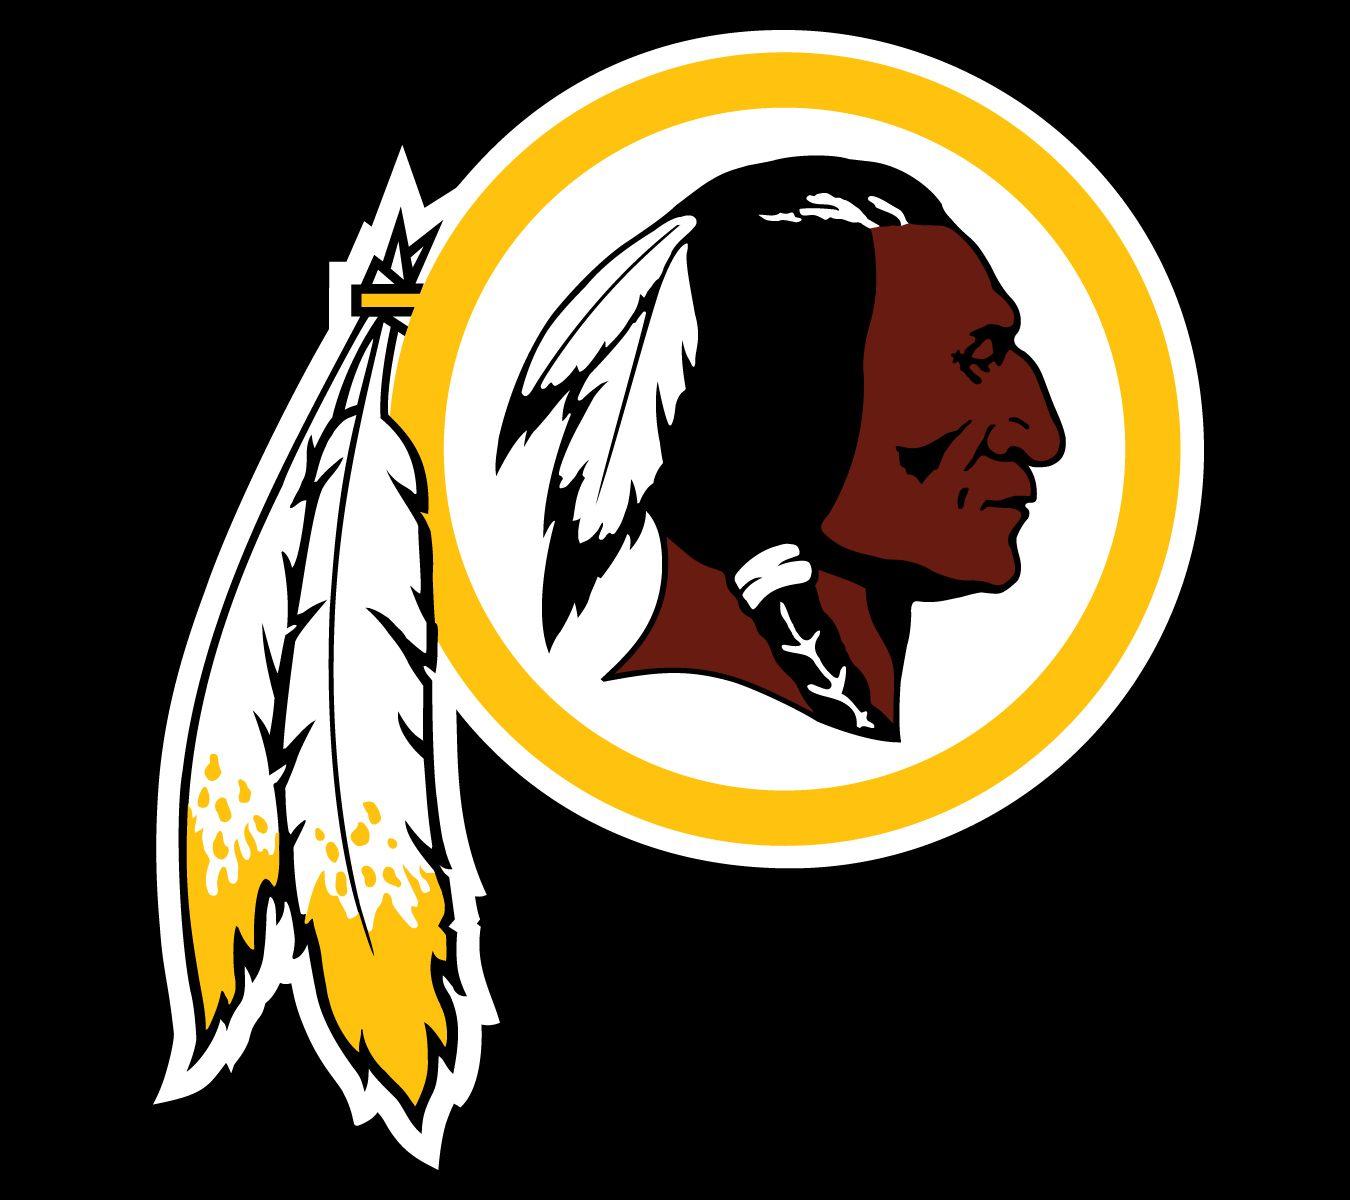 American with Red and Yellow Logo - Washington Redskins Logo, Redskins Symbol, Meaning, History and ...